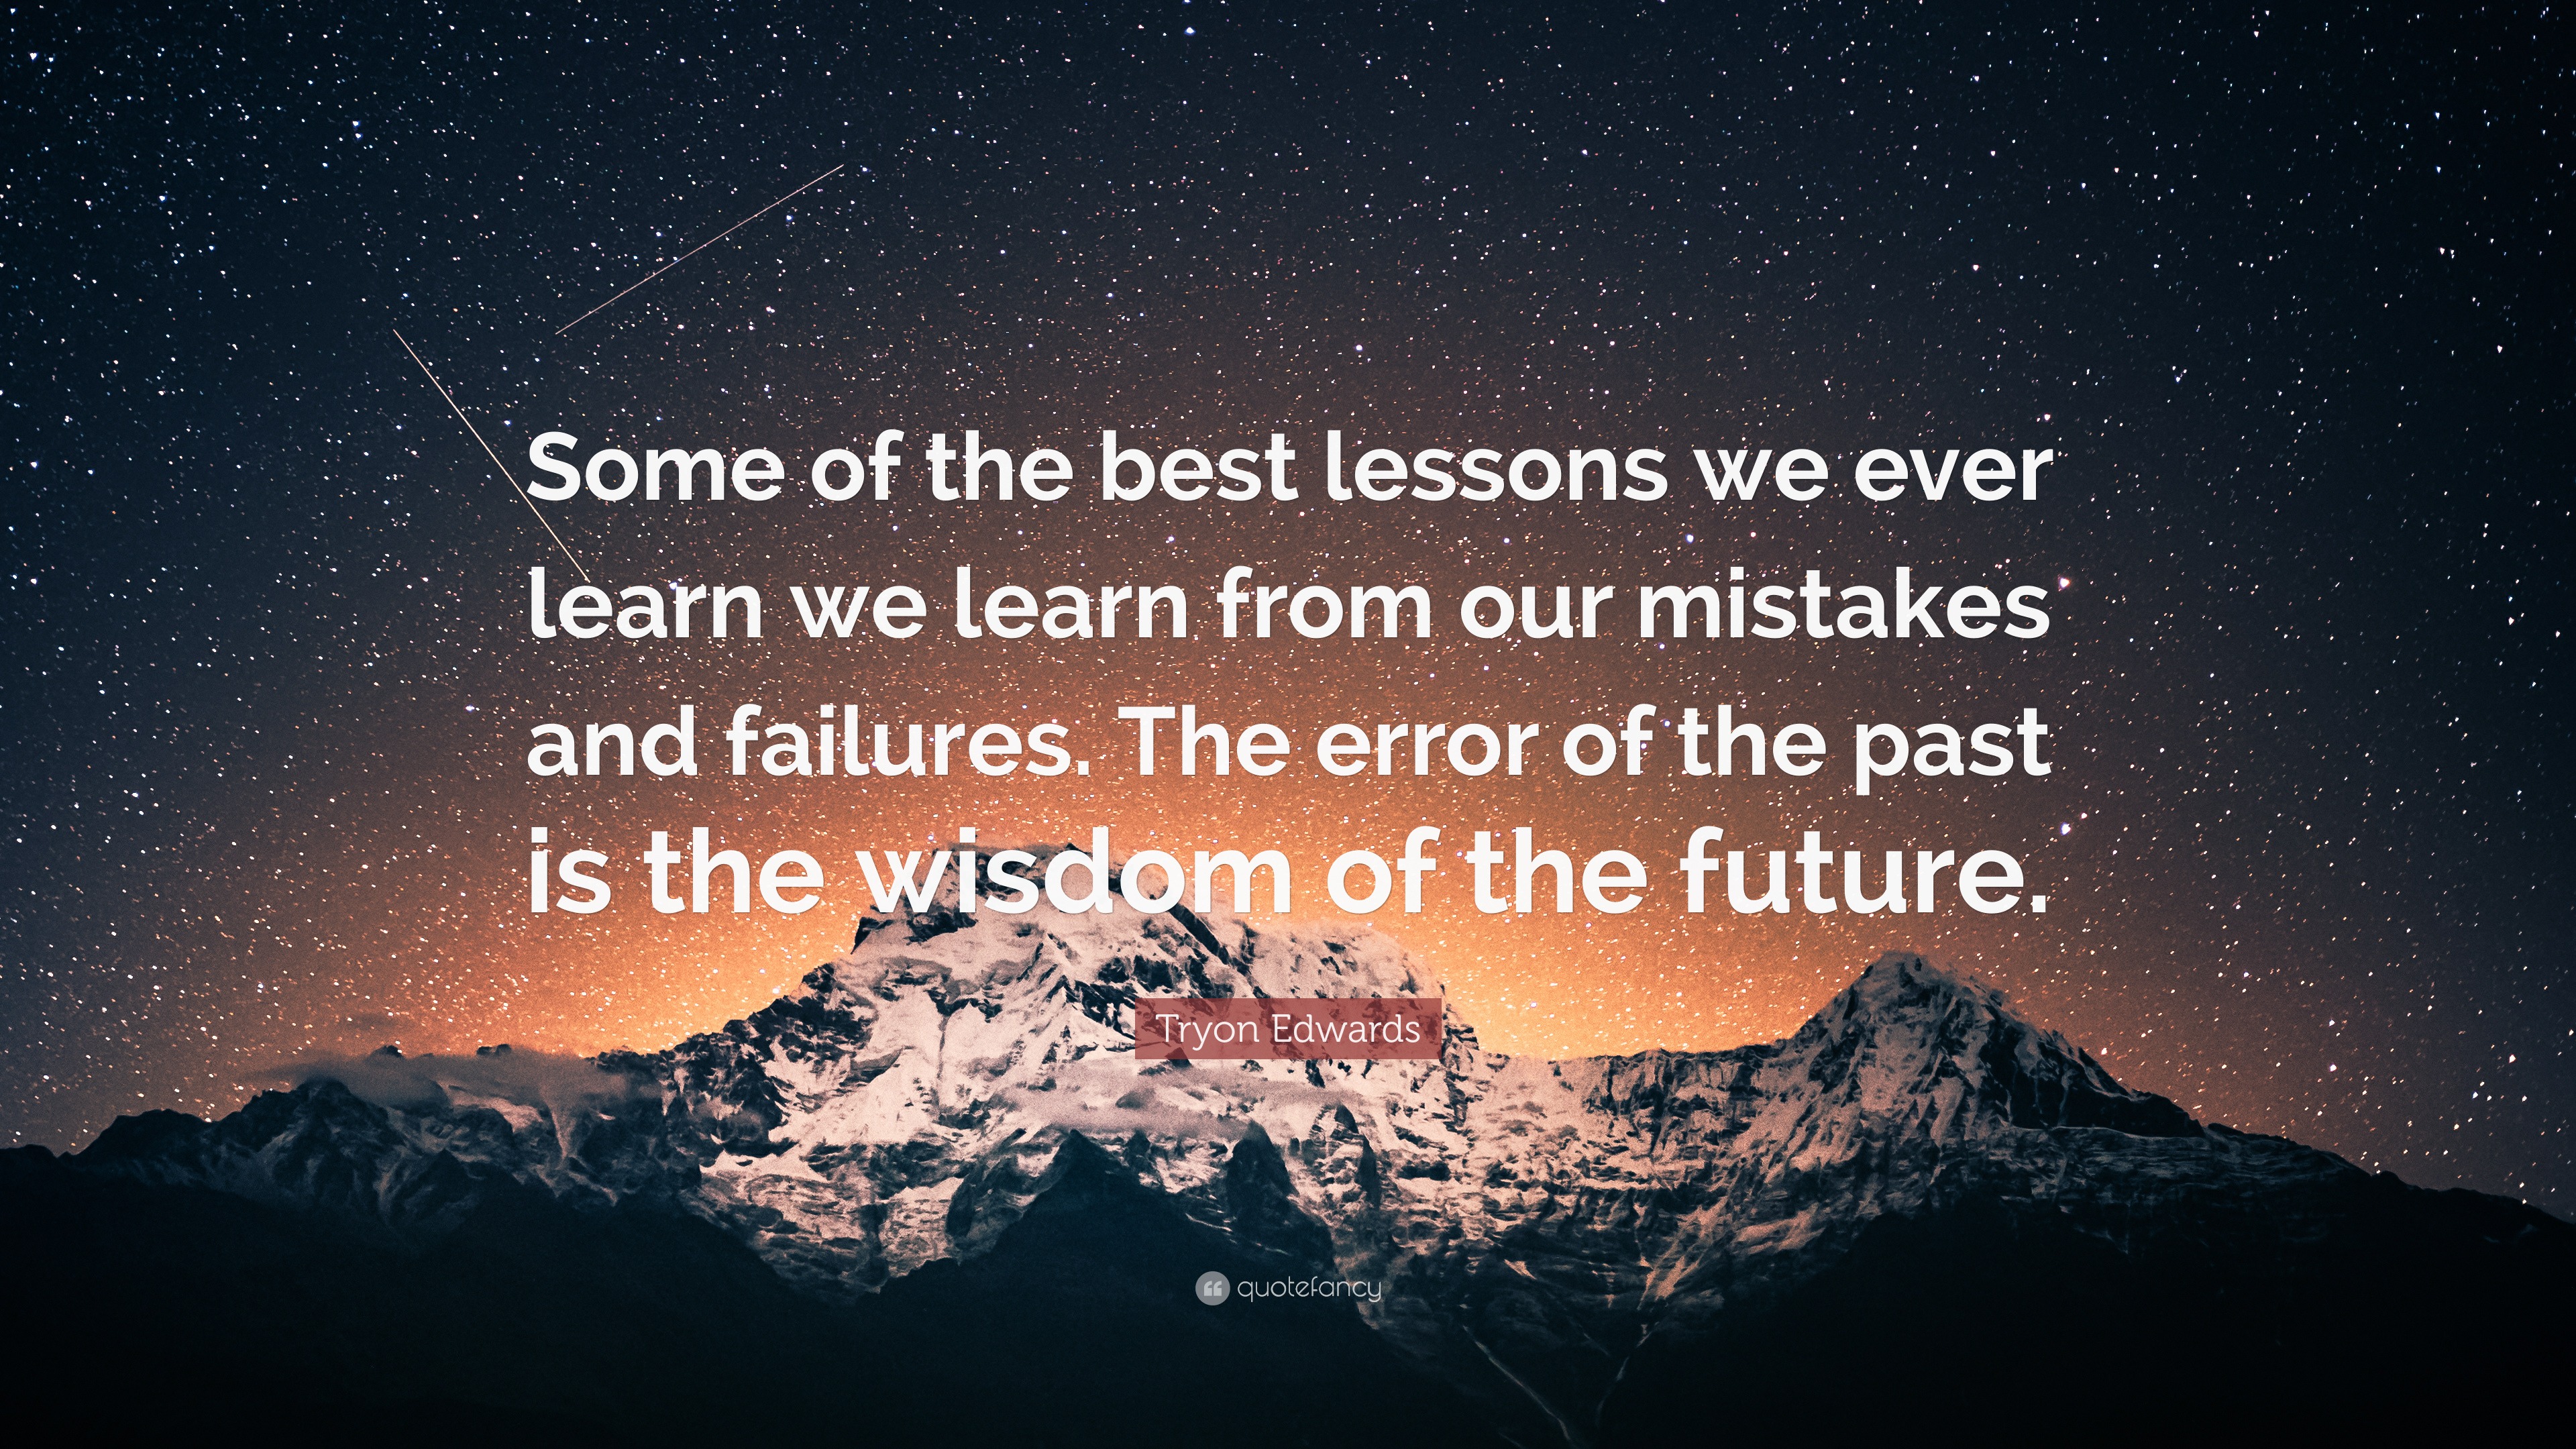 tryon-edwards-quote-some-of-the-best-lessons-we-ever-learn-we-learn-from-our-mistakes-and